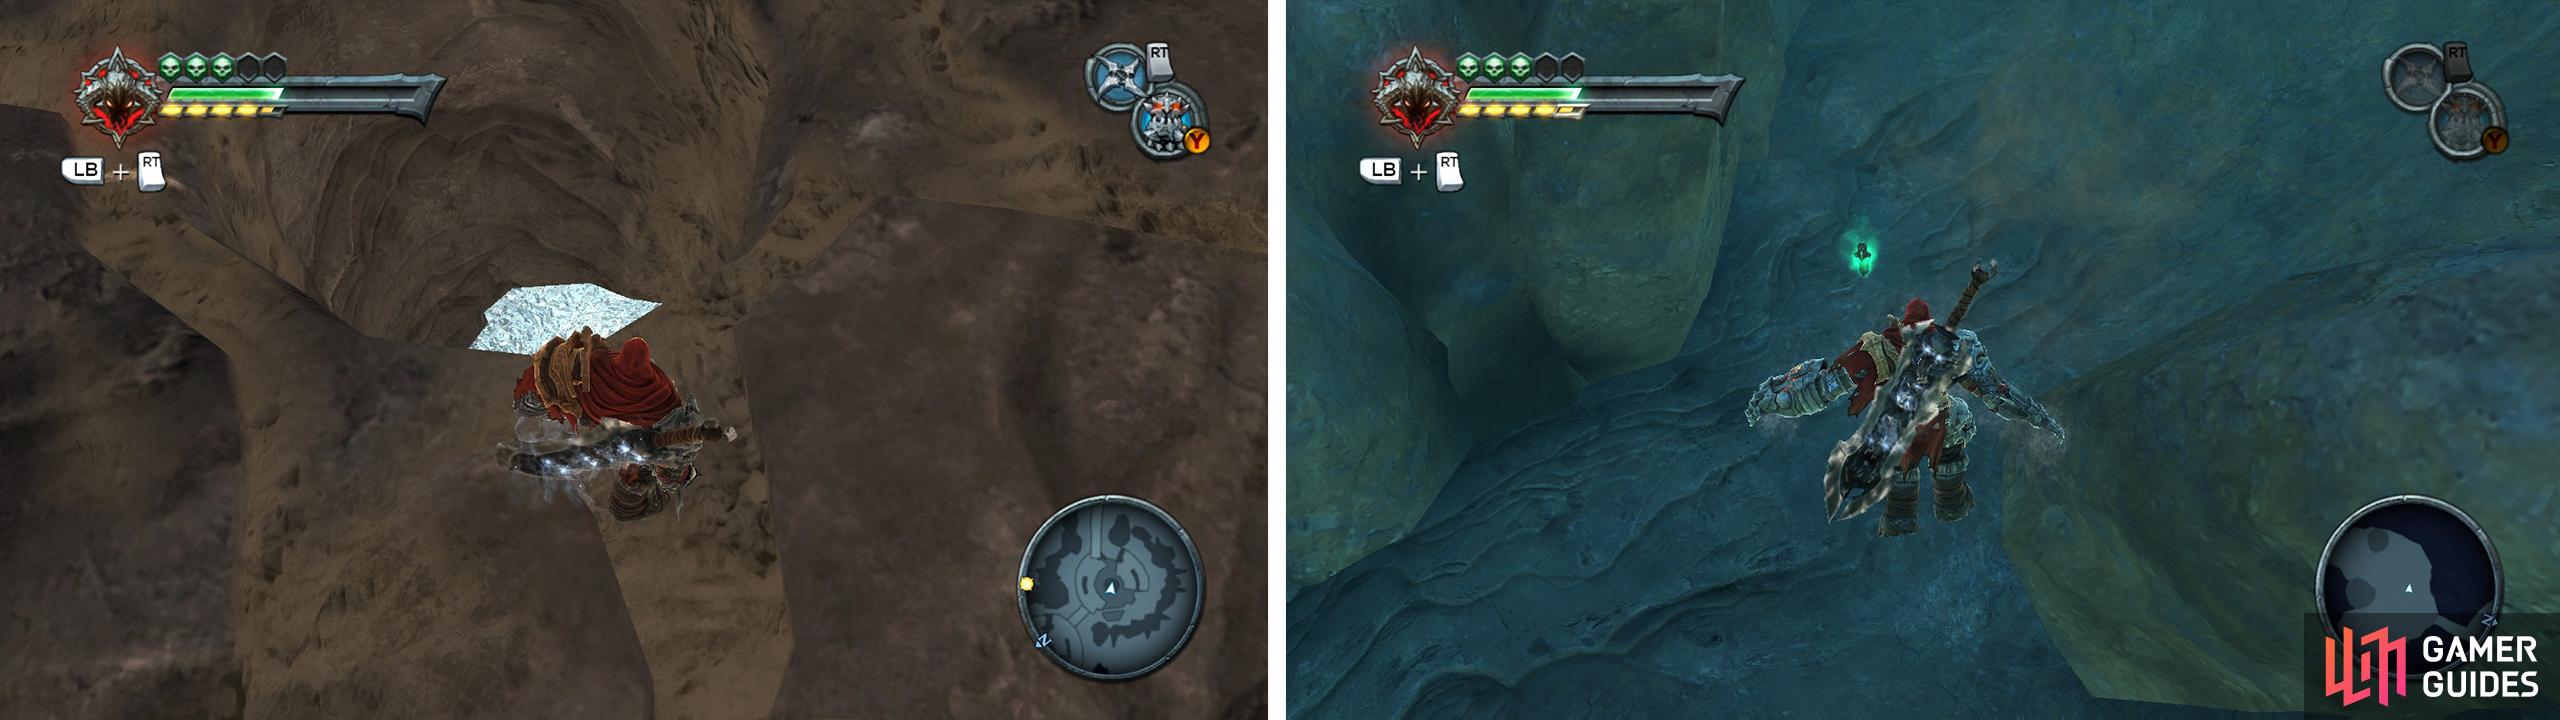 Drop down the hole (left) and swim to the bottom of the pool to find an Artefact (right)